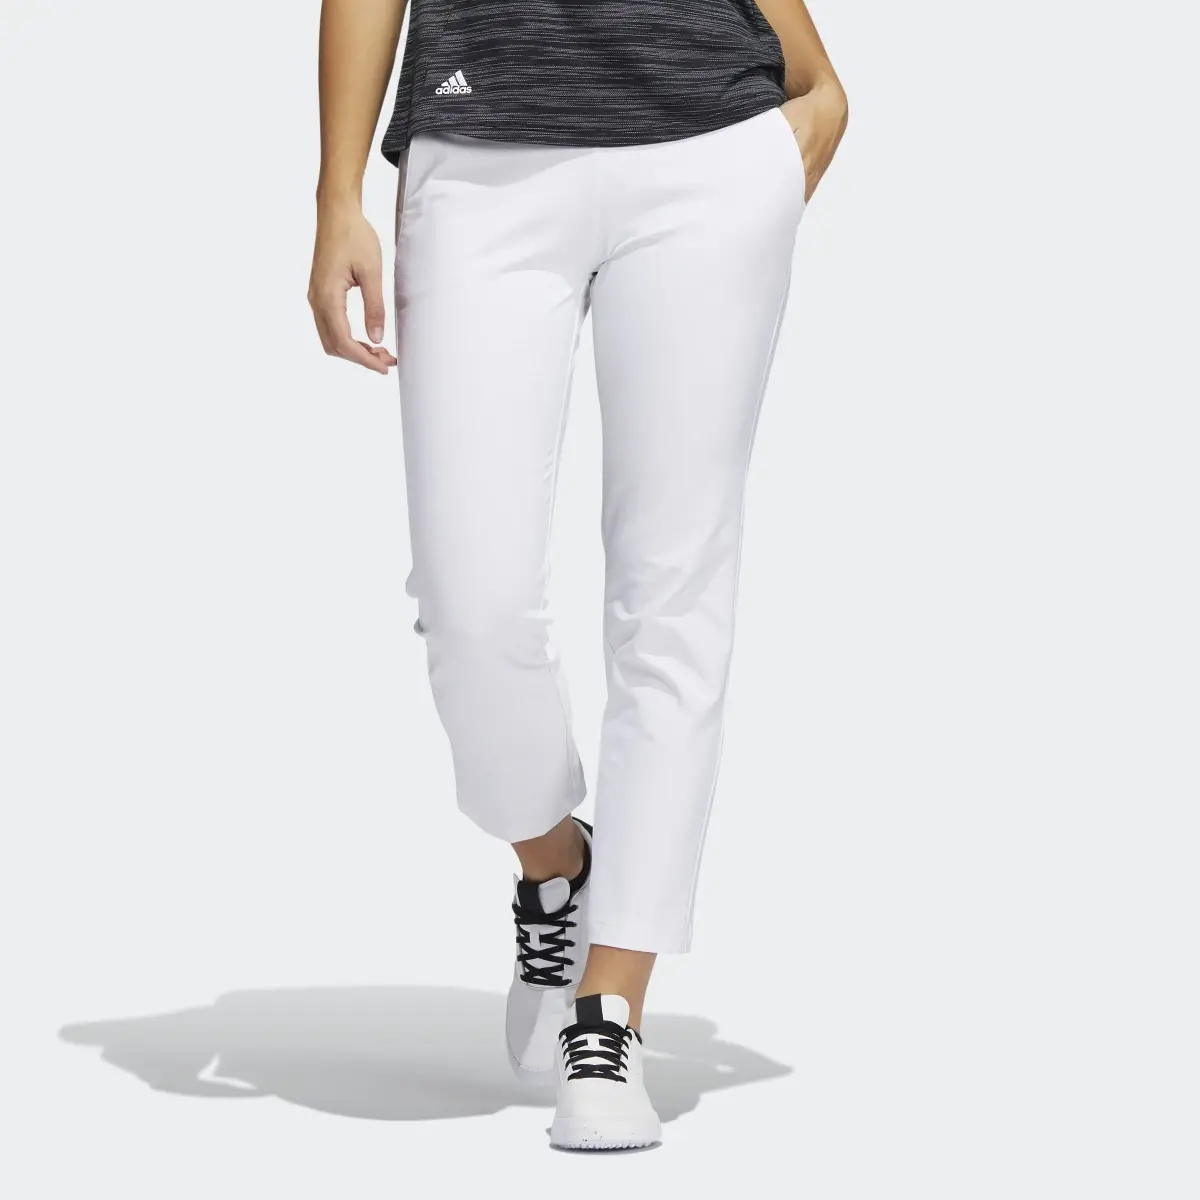 Adidas Pull-On Ankle Pull-On Ankle Golf Pants. 1